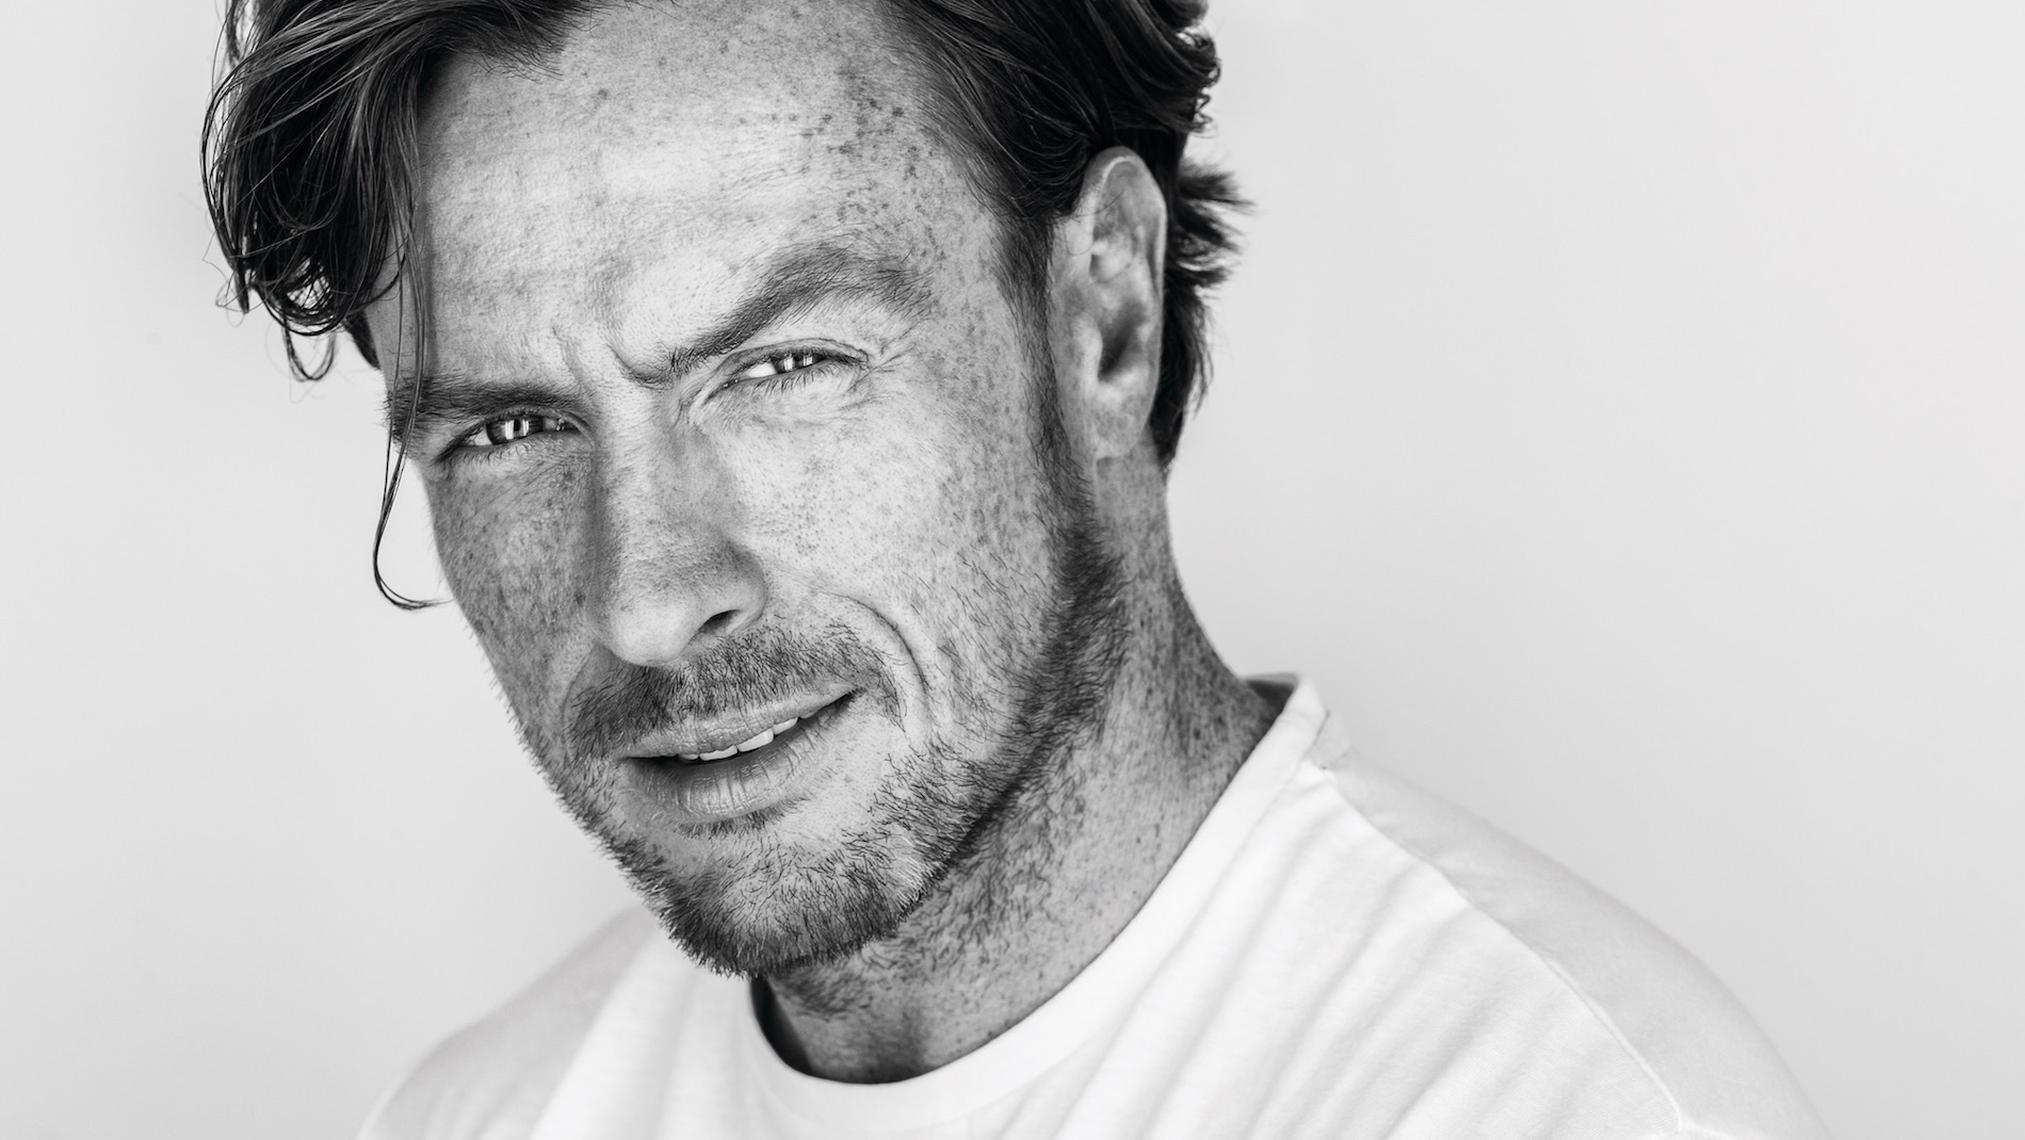 This Oct. 15, 2013 file photo shows actor Toby Stephens posing for